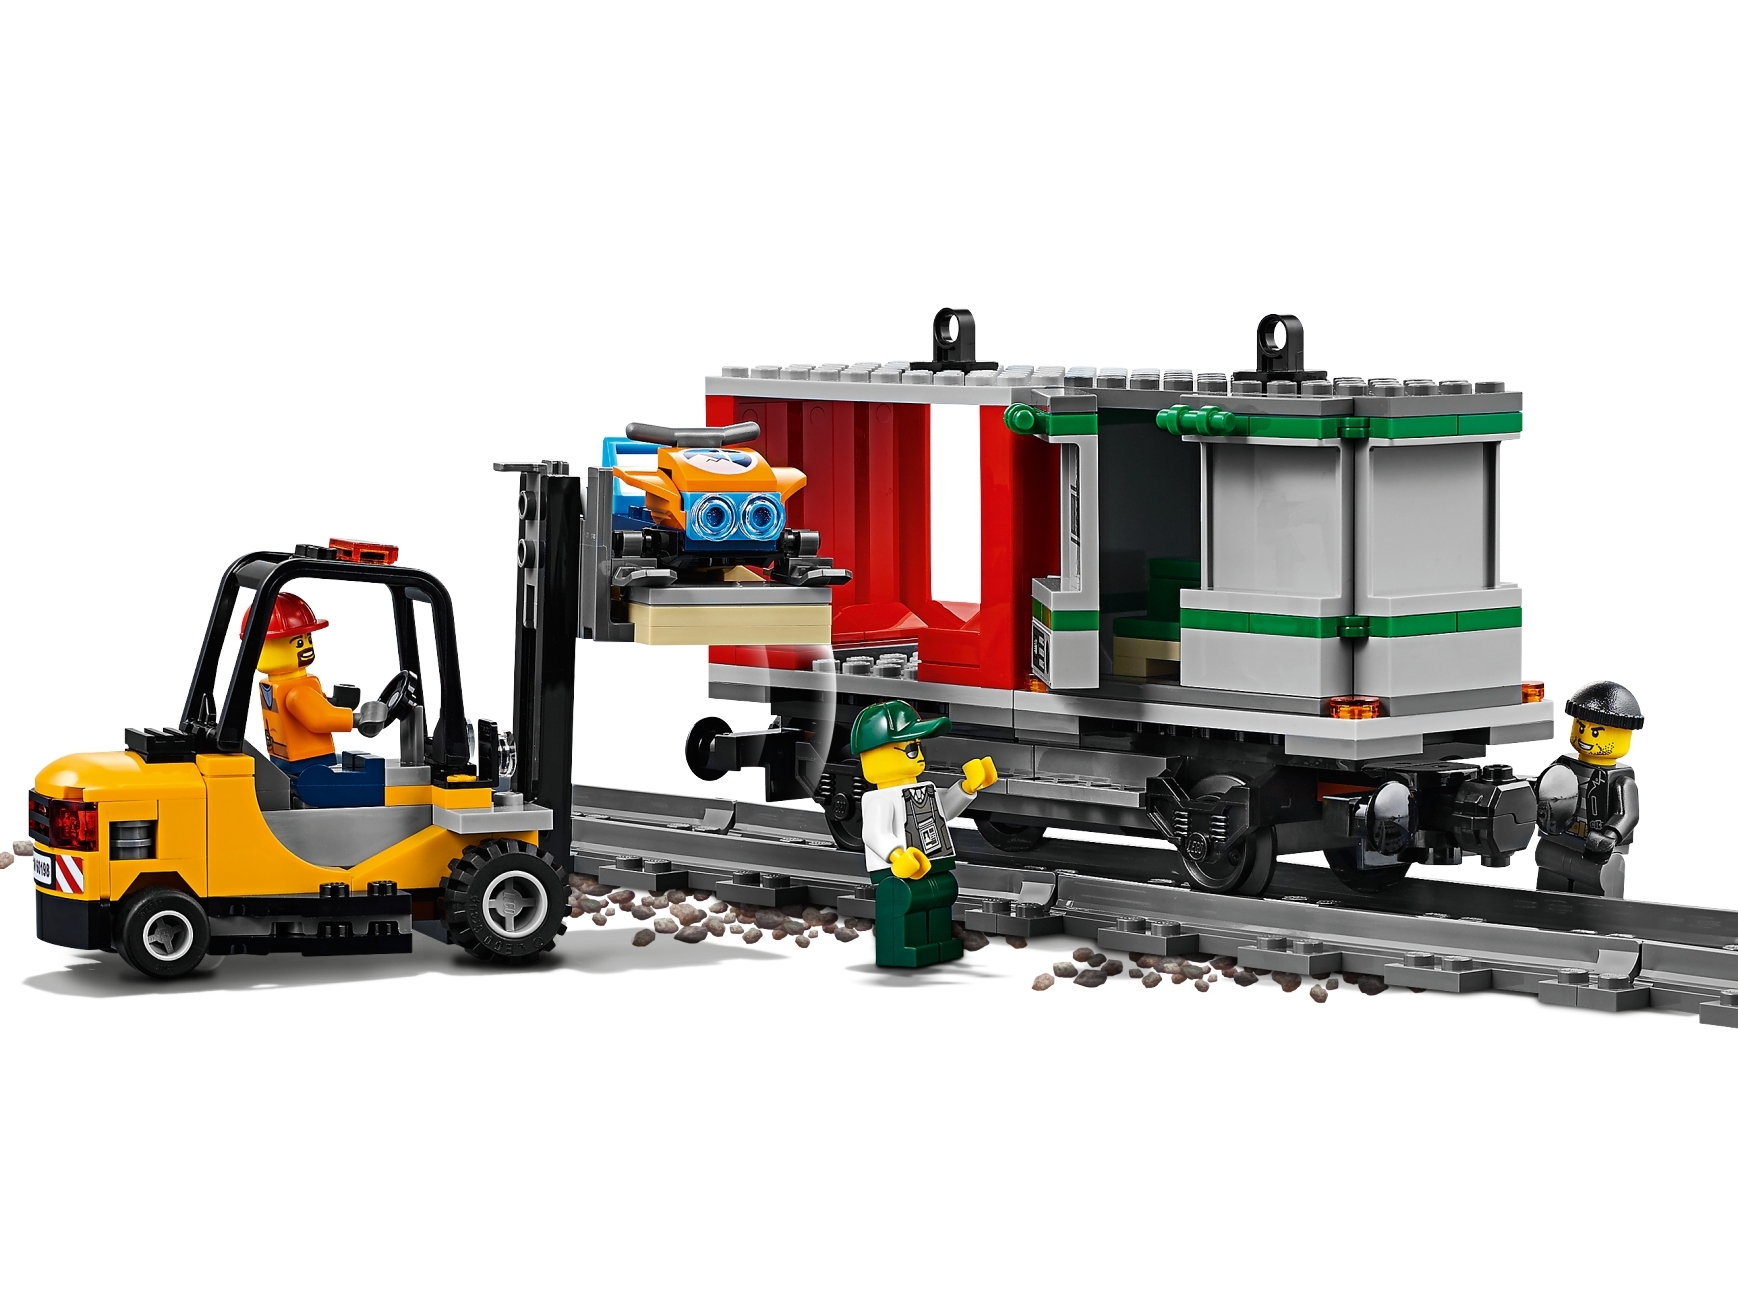 Lego City 60198 Cargo Train with Powered Up App Speed Build 